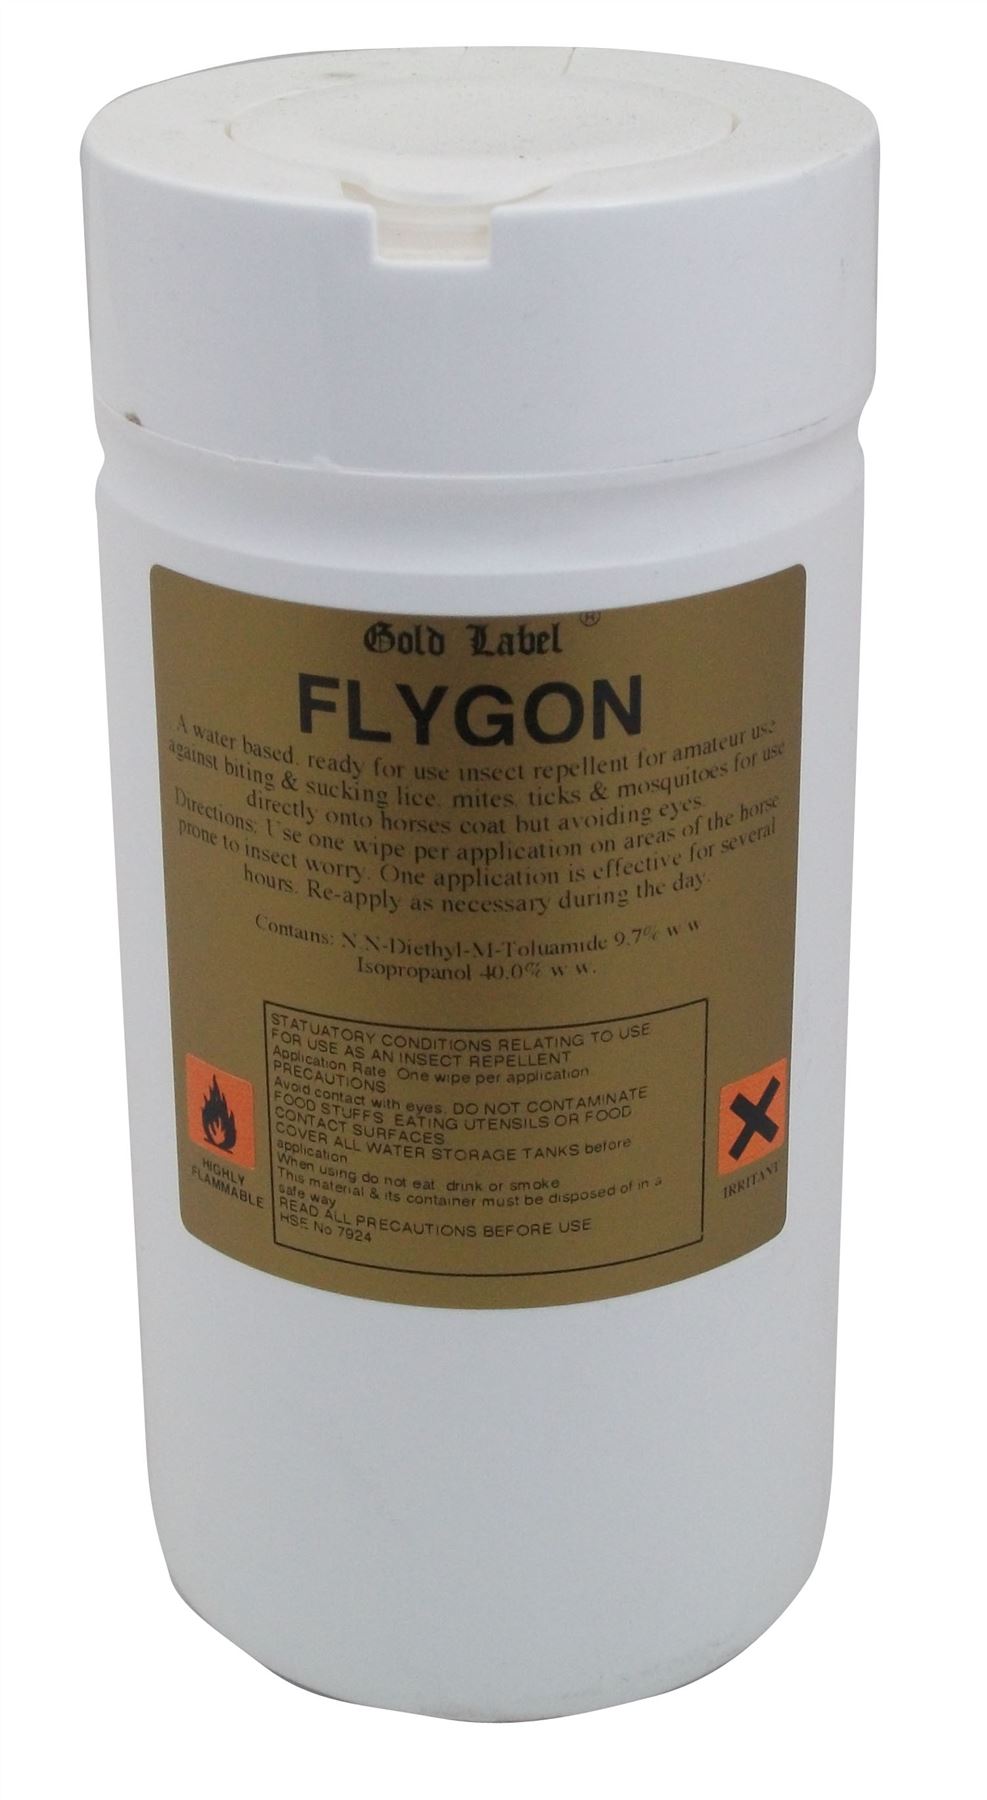 Gold Label Flygon 12 Wipes - Just Horse Riders